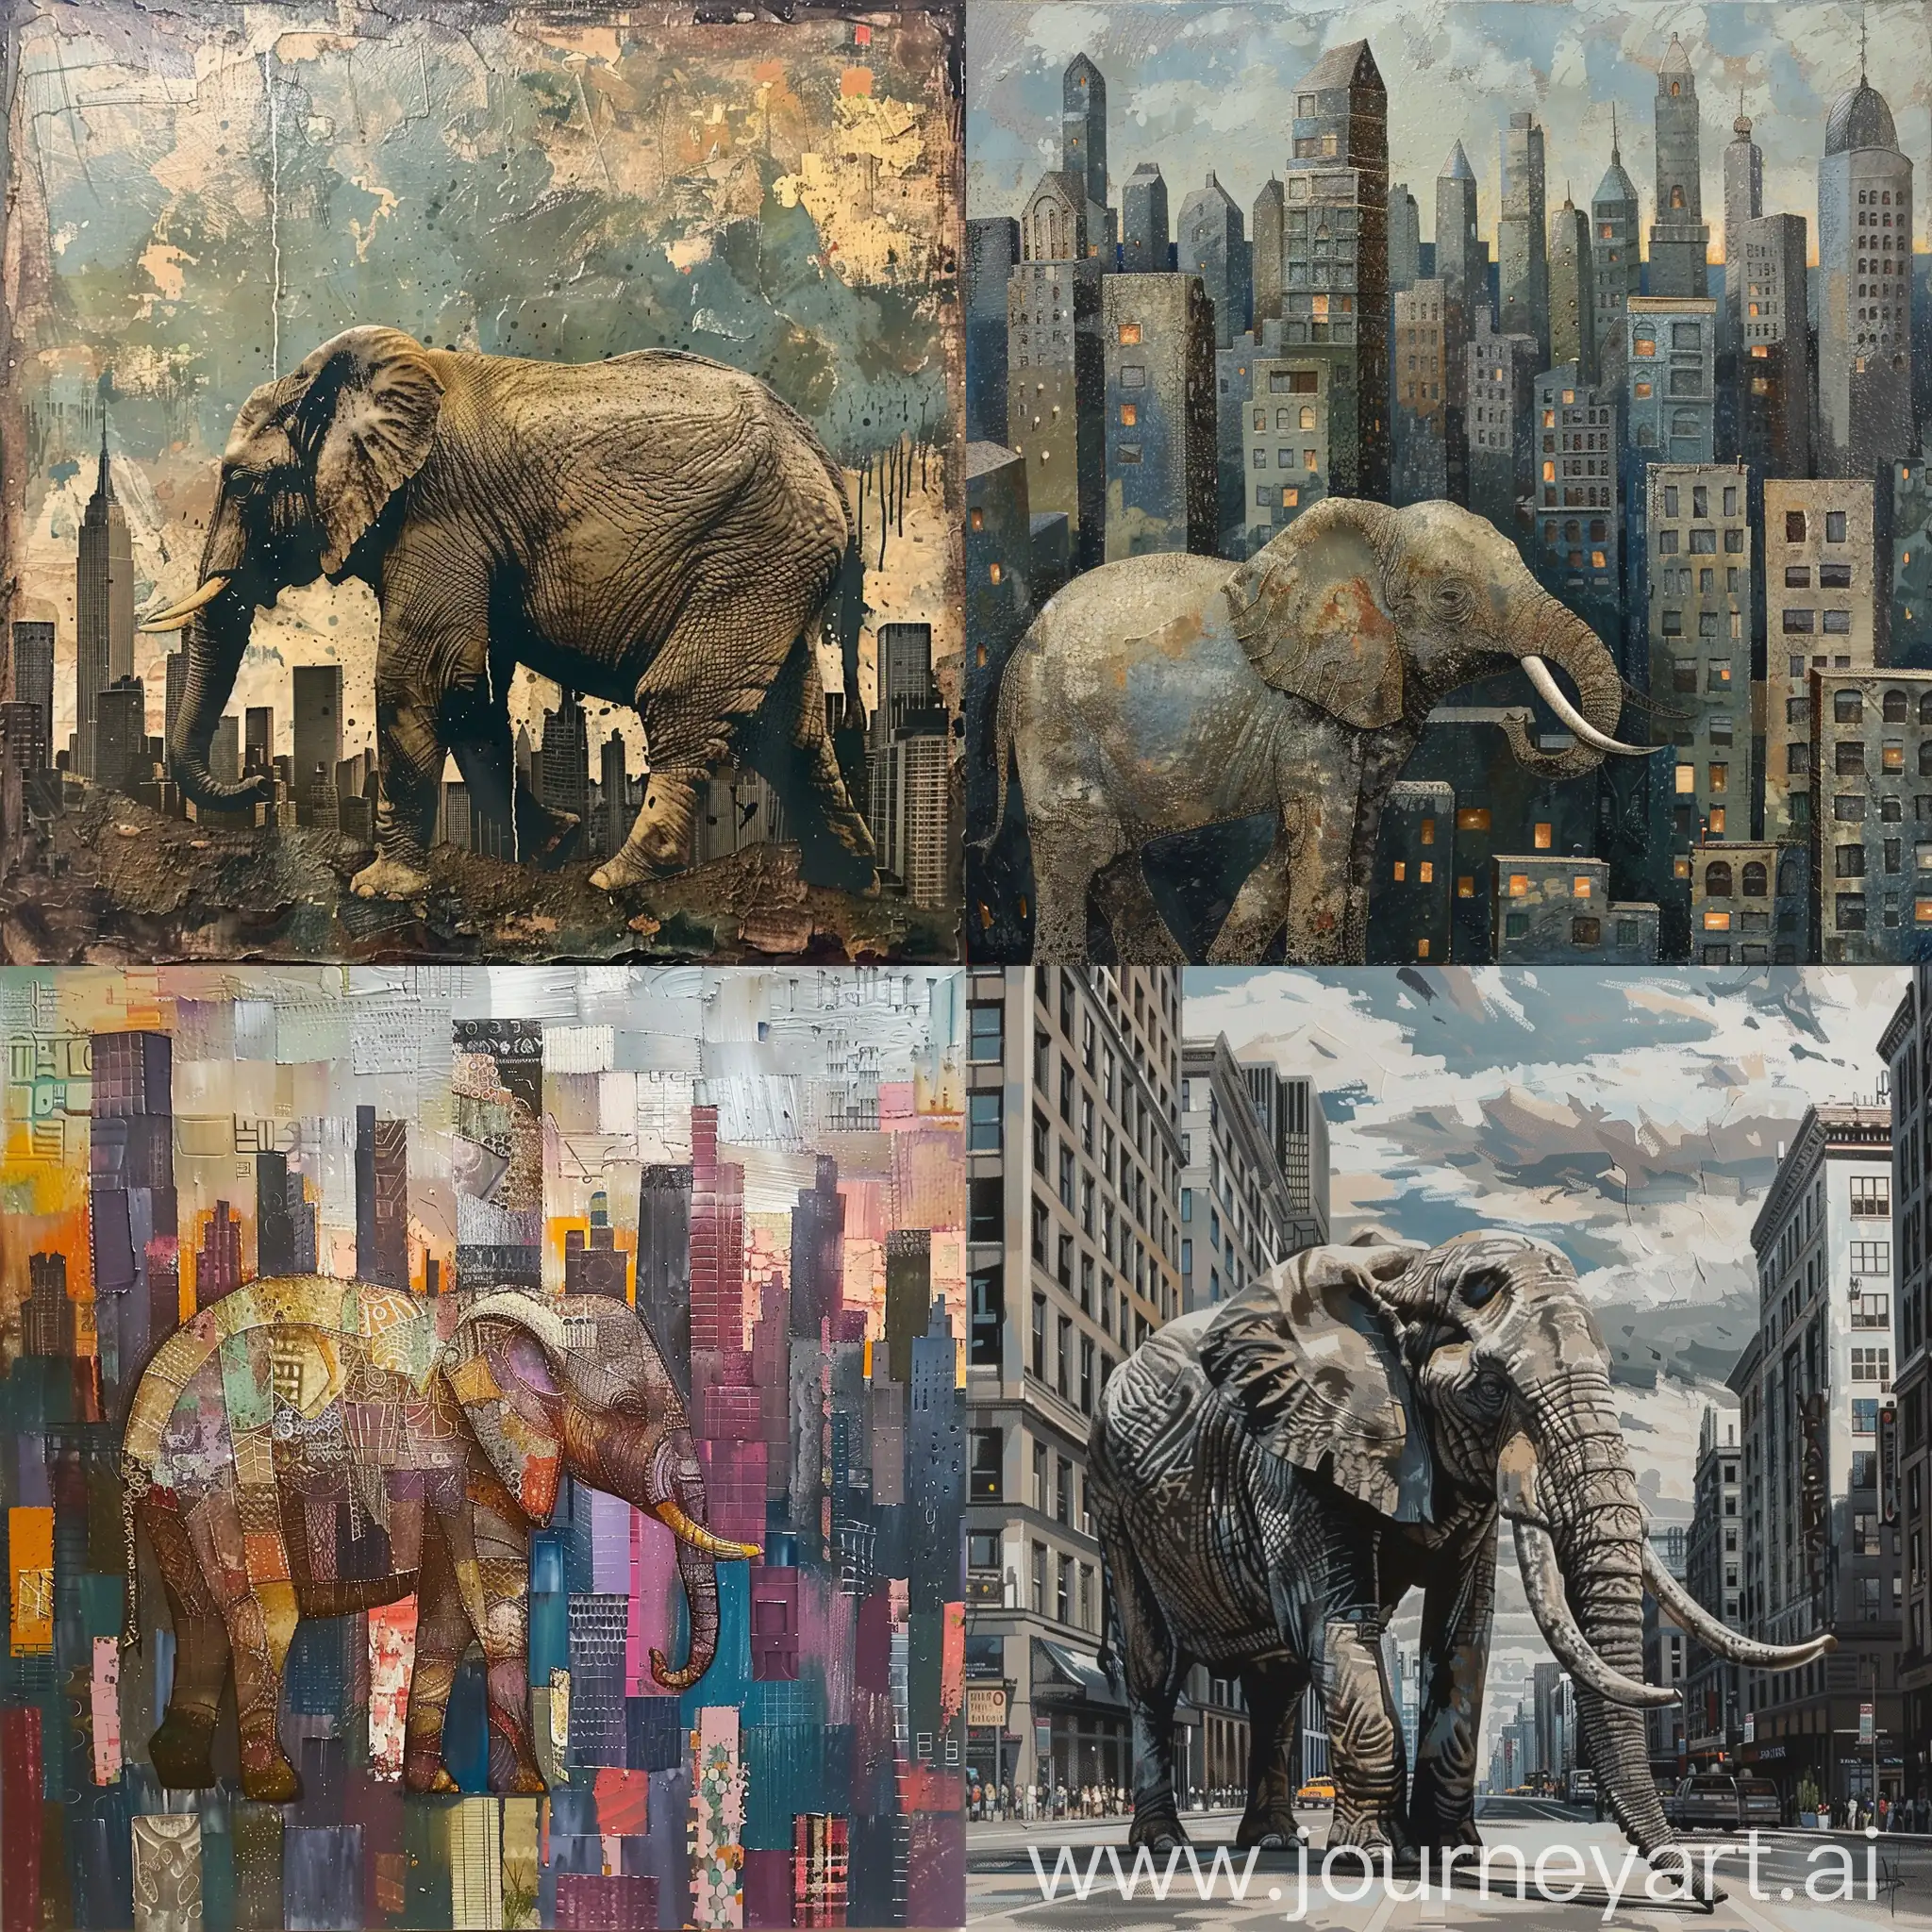 Elephant in the city
